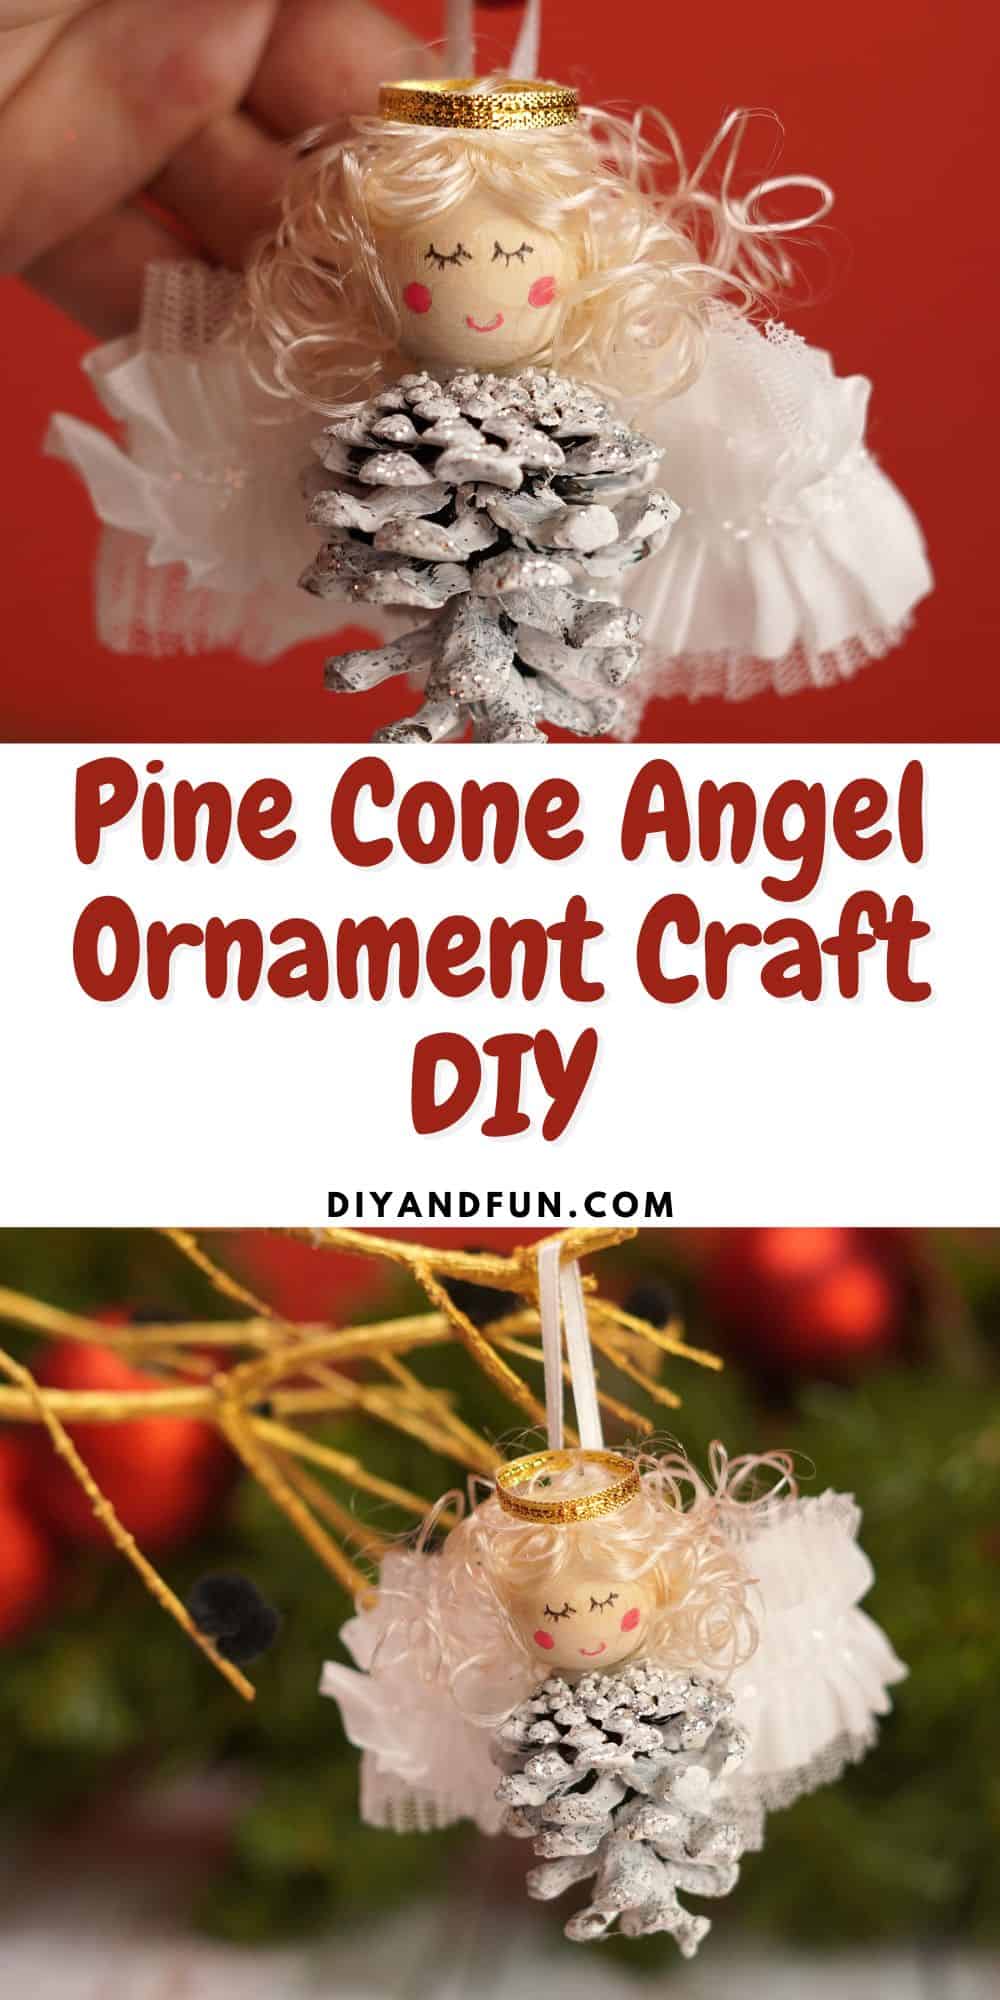 Pine Cone Angel Ornament Craft DIY, a simple holiday or Christmas craft idea for turning a pine cone into an angel